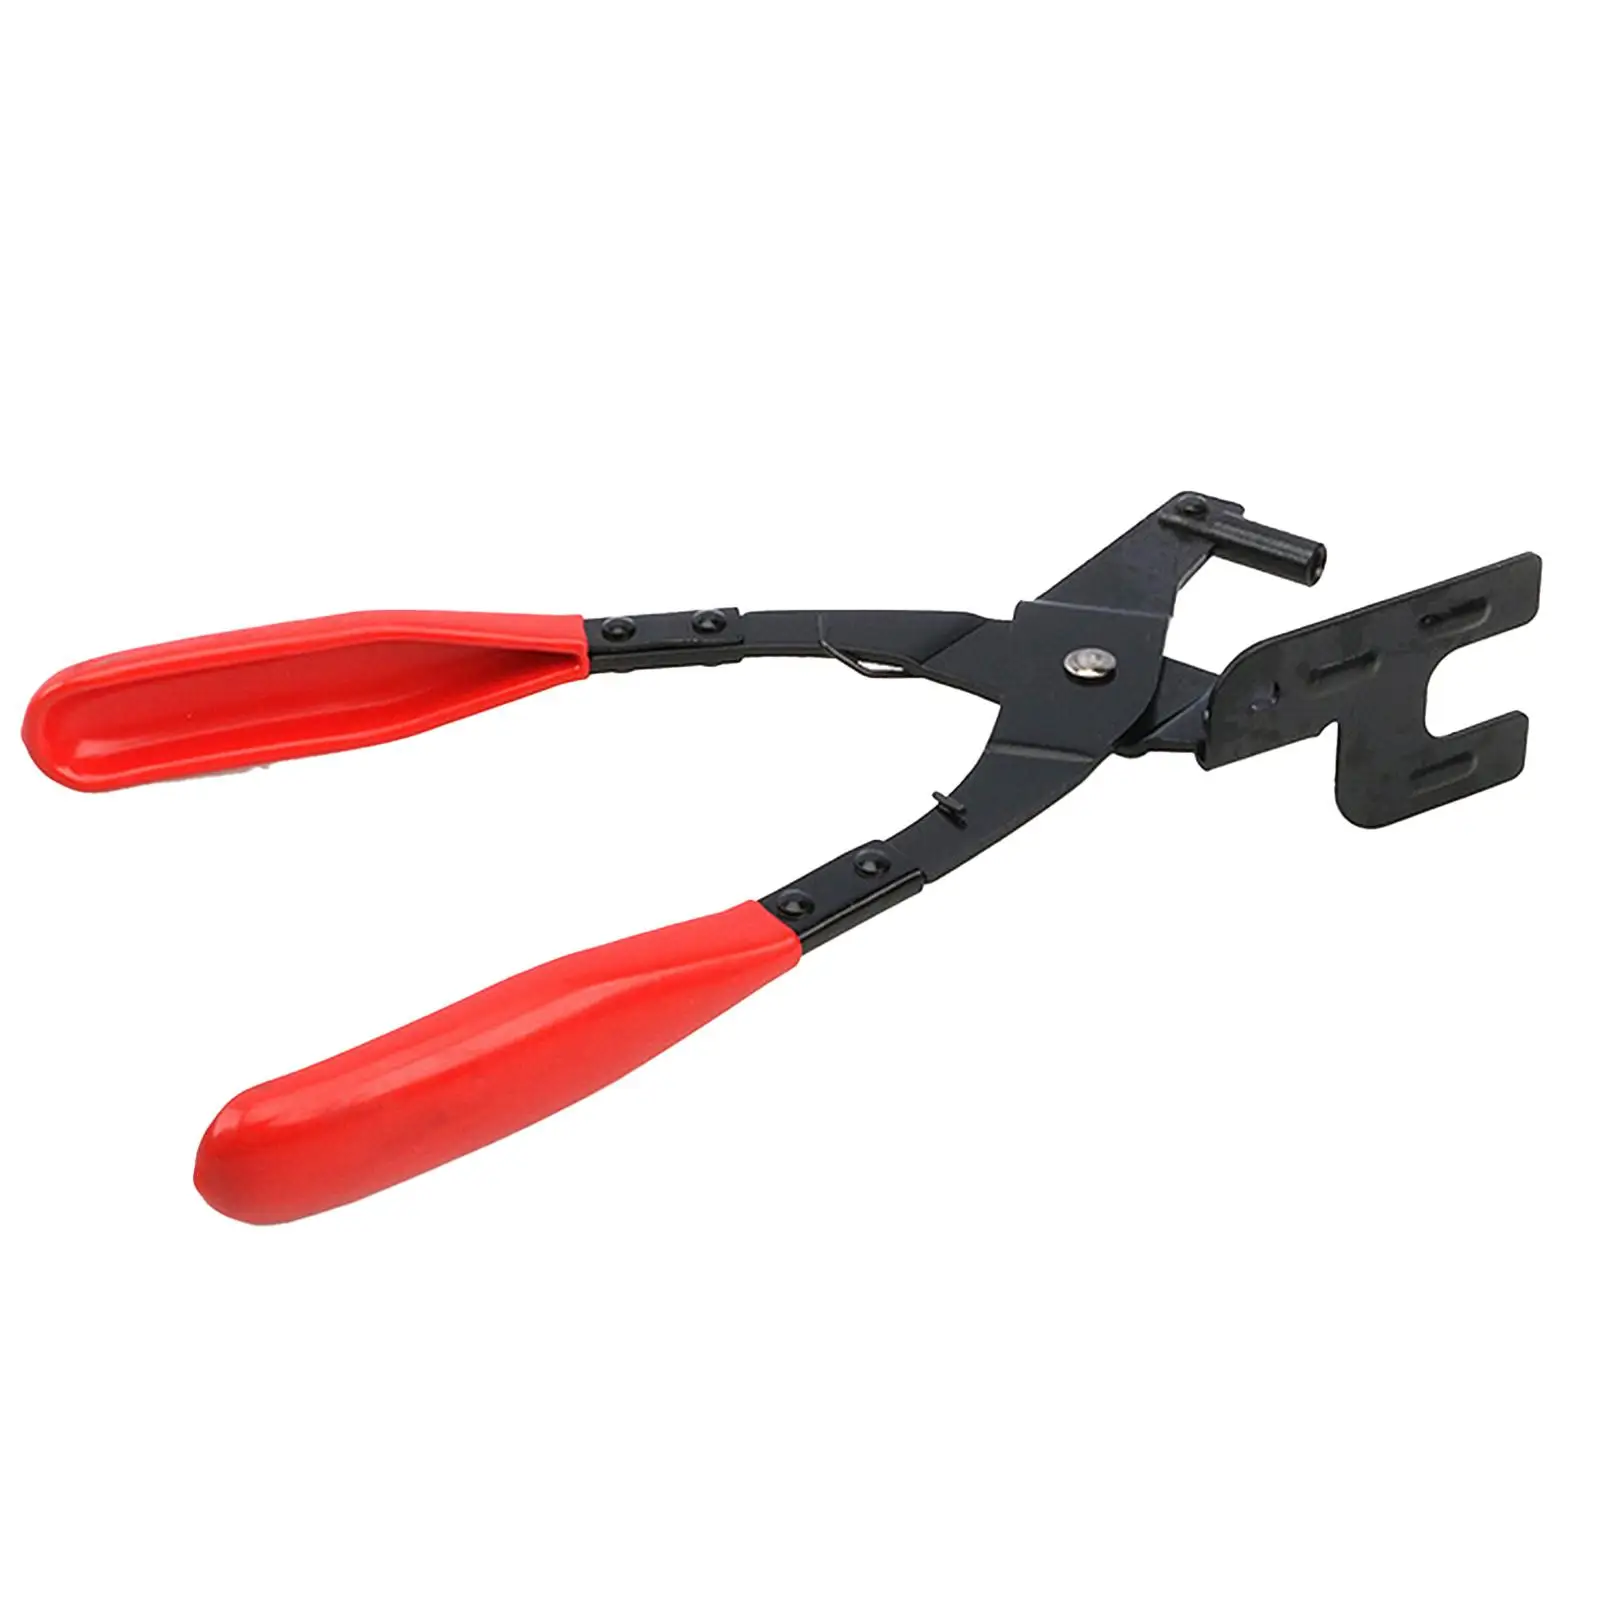 Car Exhaust Hanger Removal Pliers Anti Slip Exhaust Grommet Pulling Pliers Compatible with All Exhaust Rubber Hangers Red